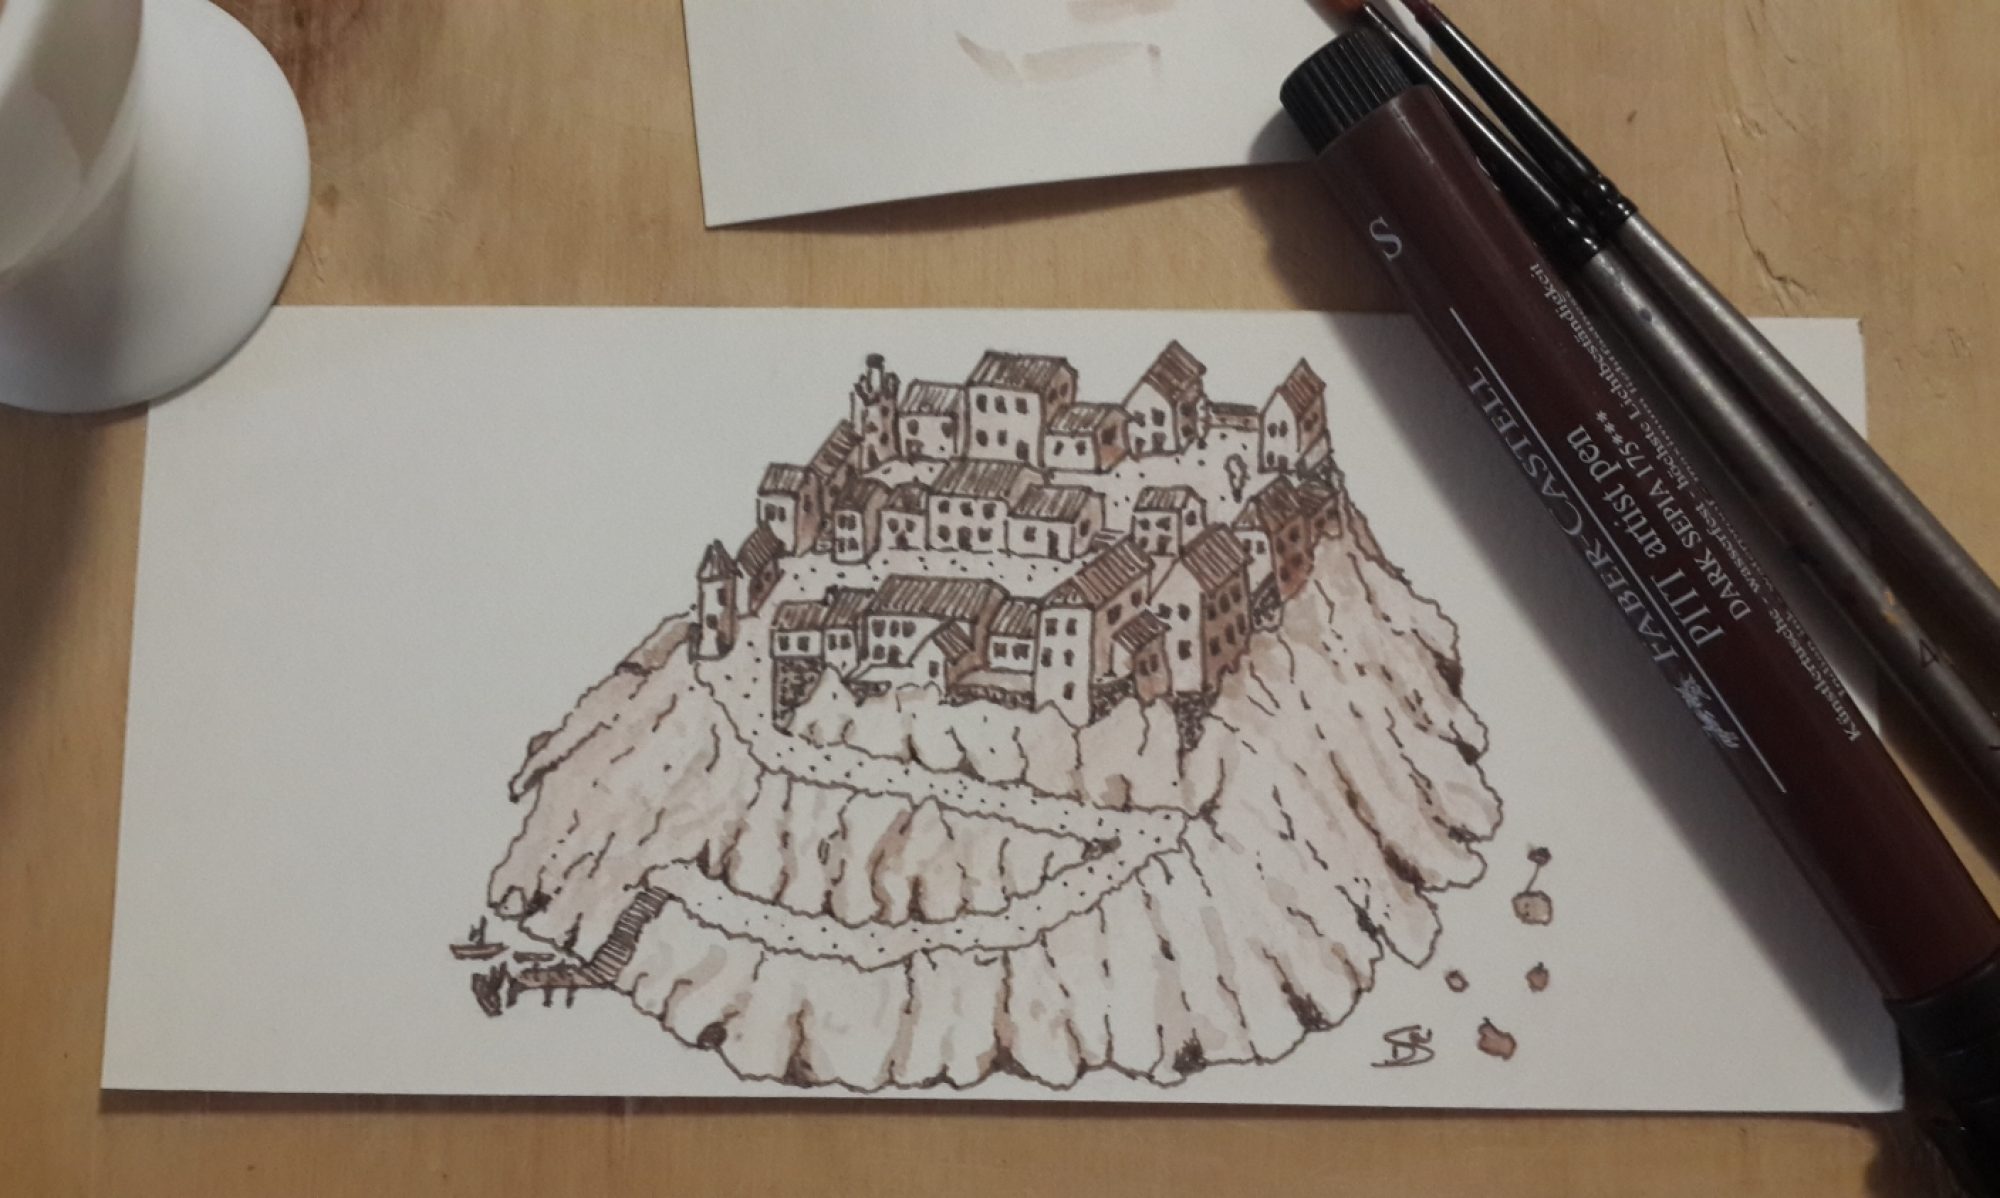 A village on an island mountain for imagery in DnD.